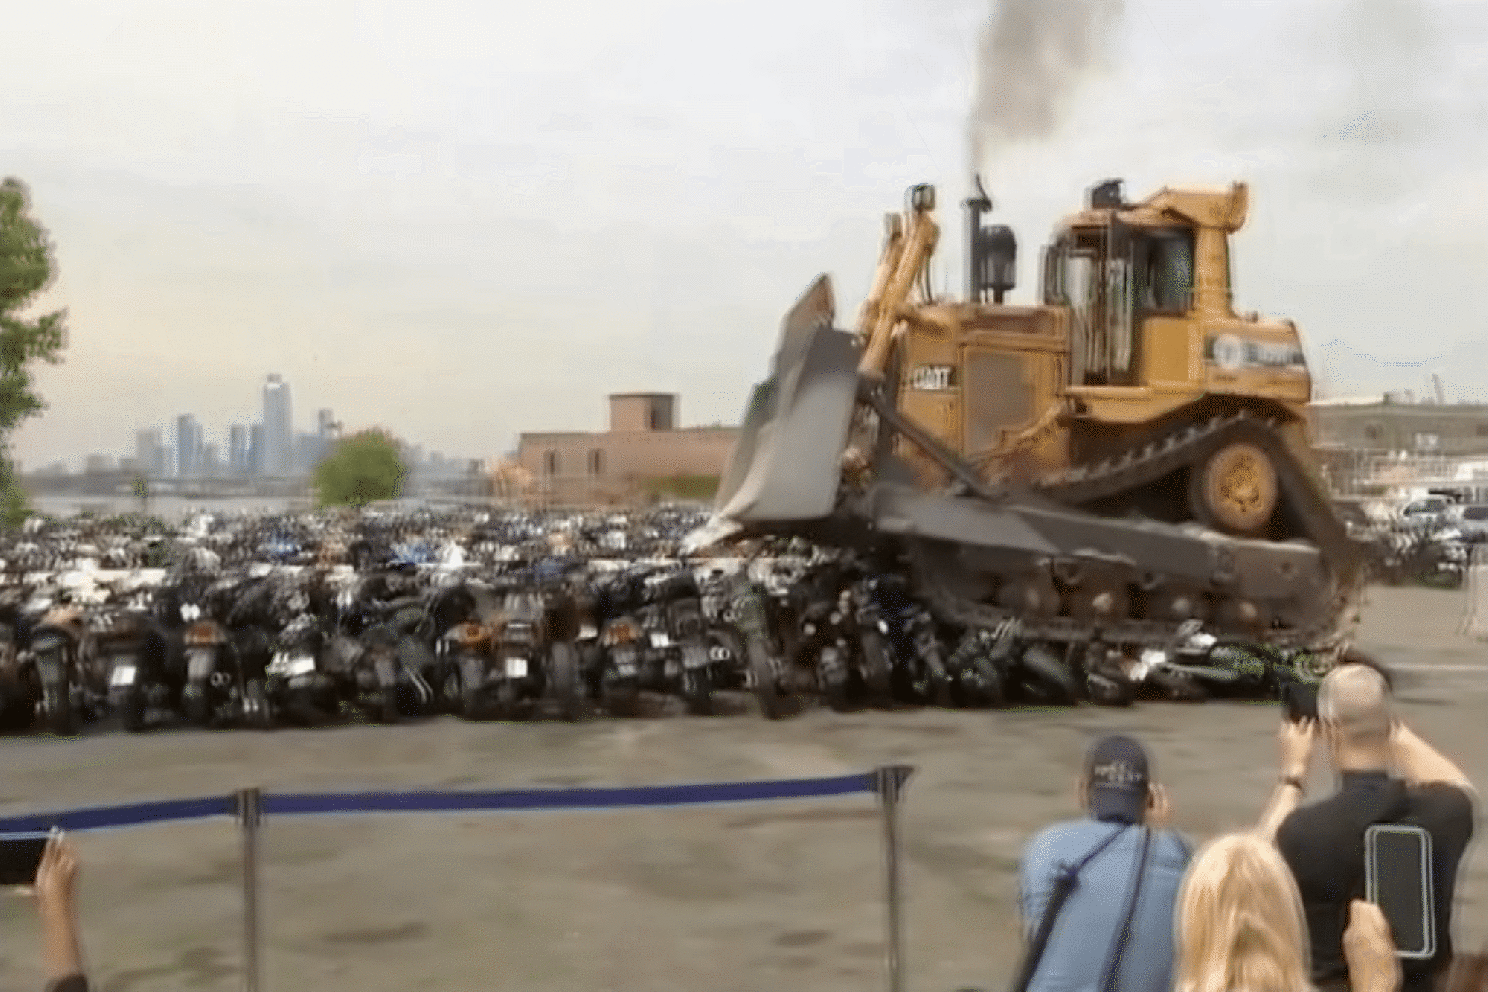 NYC destroys nearly 100 ‘destructive’ and ‘dangerous’ dirt bikes